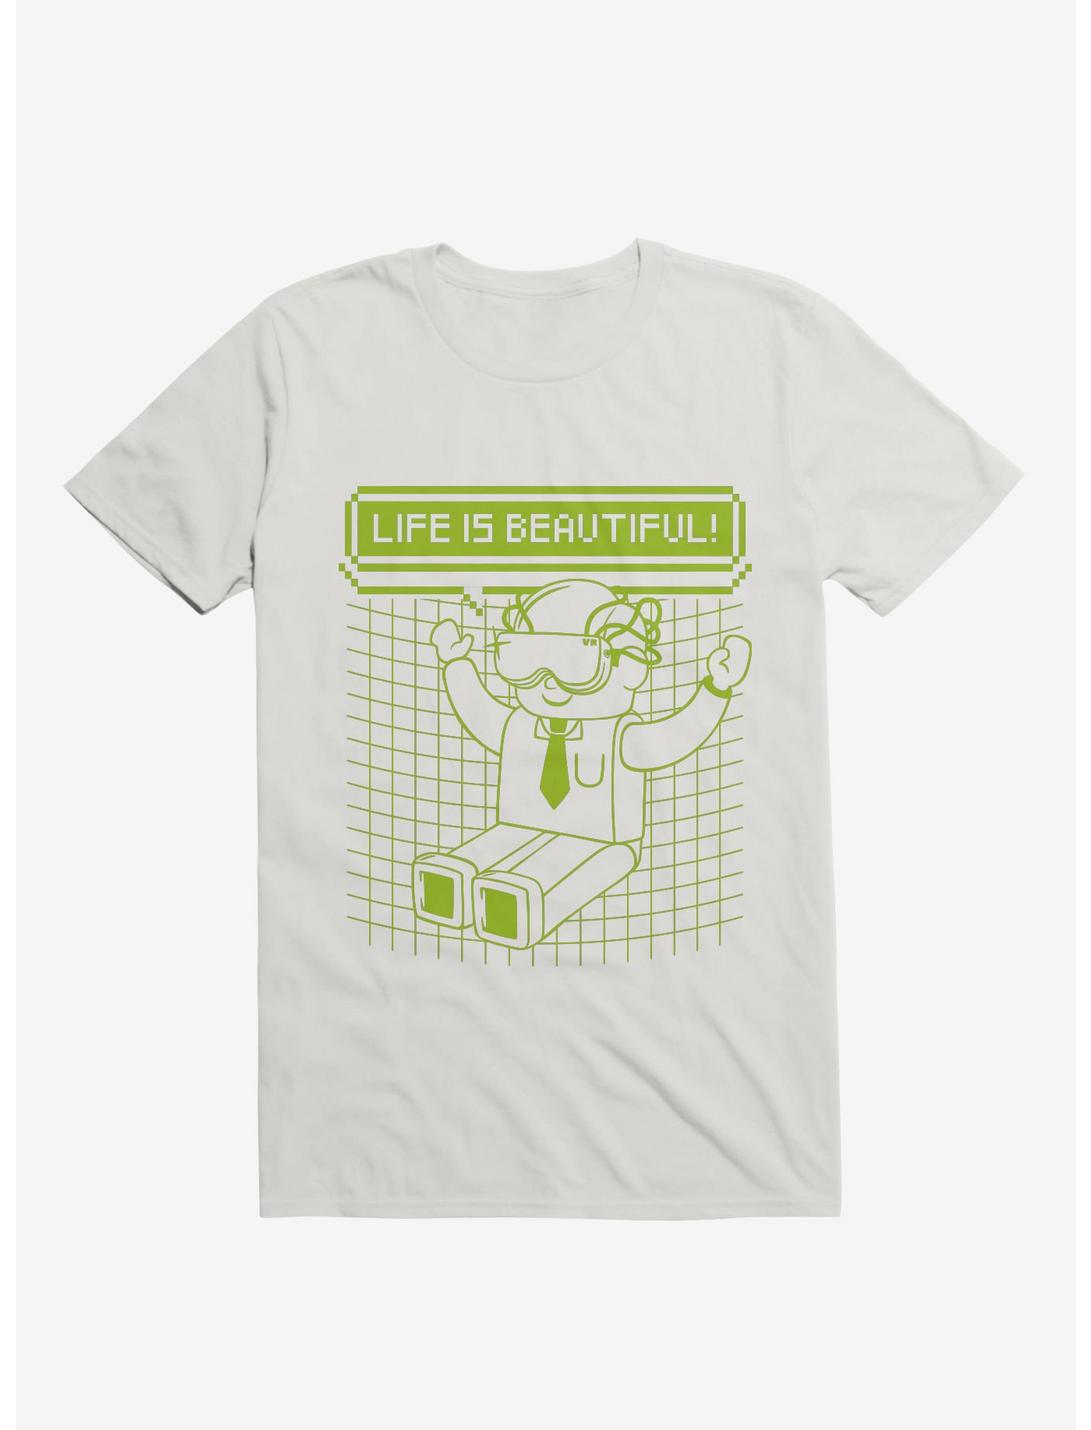 Life Is Beautiful! VR T-Shirt, WHITE, hi-res